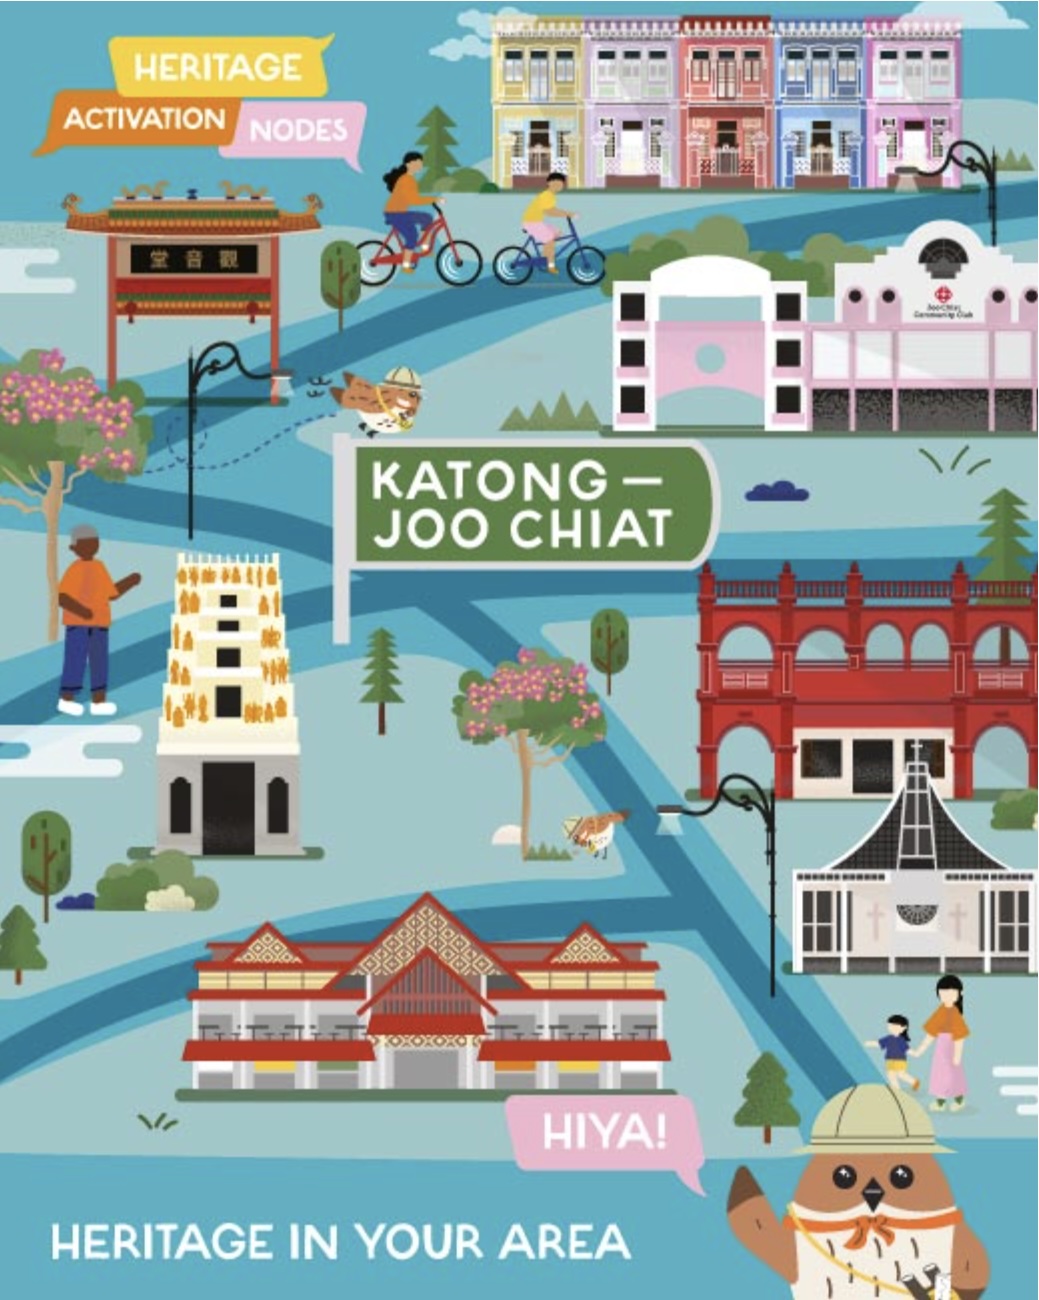 National Heritage Board launches first Heritage Activation Node in Katong-Joo Chiat